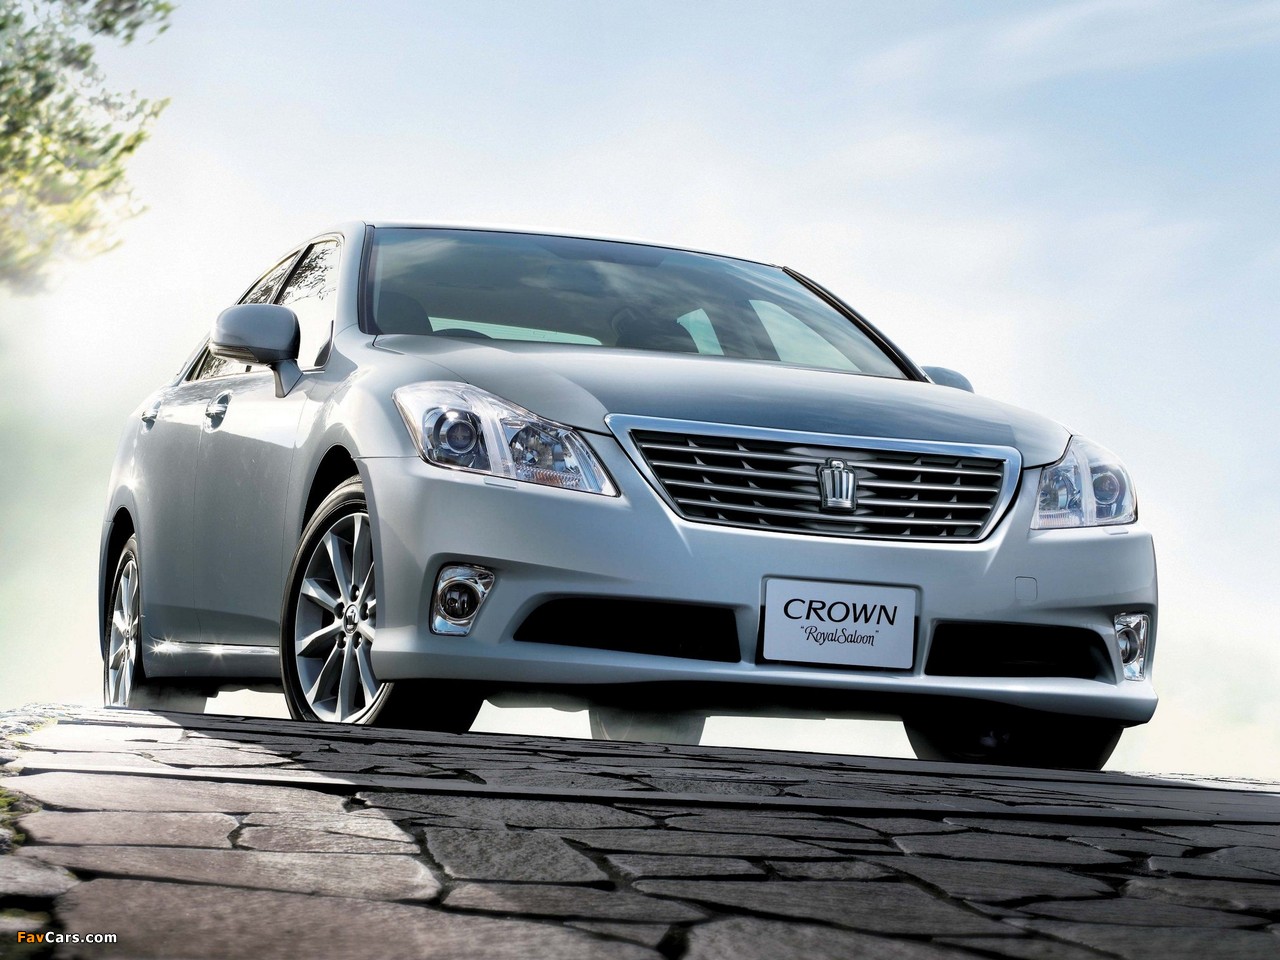 Toyota Crown Royal Saloon (S200) 2010 images (1280 x 960)